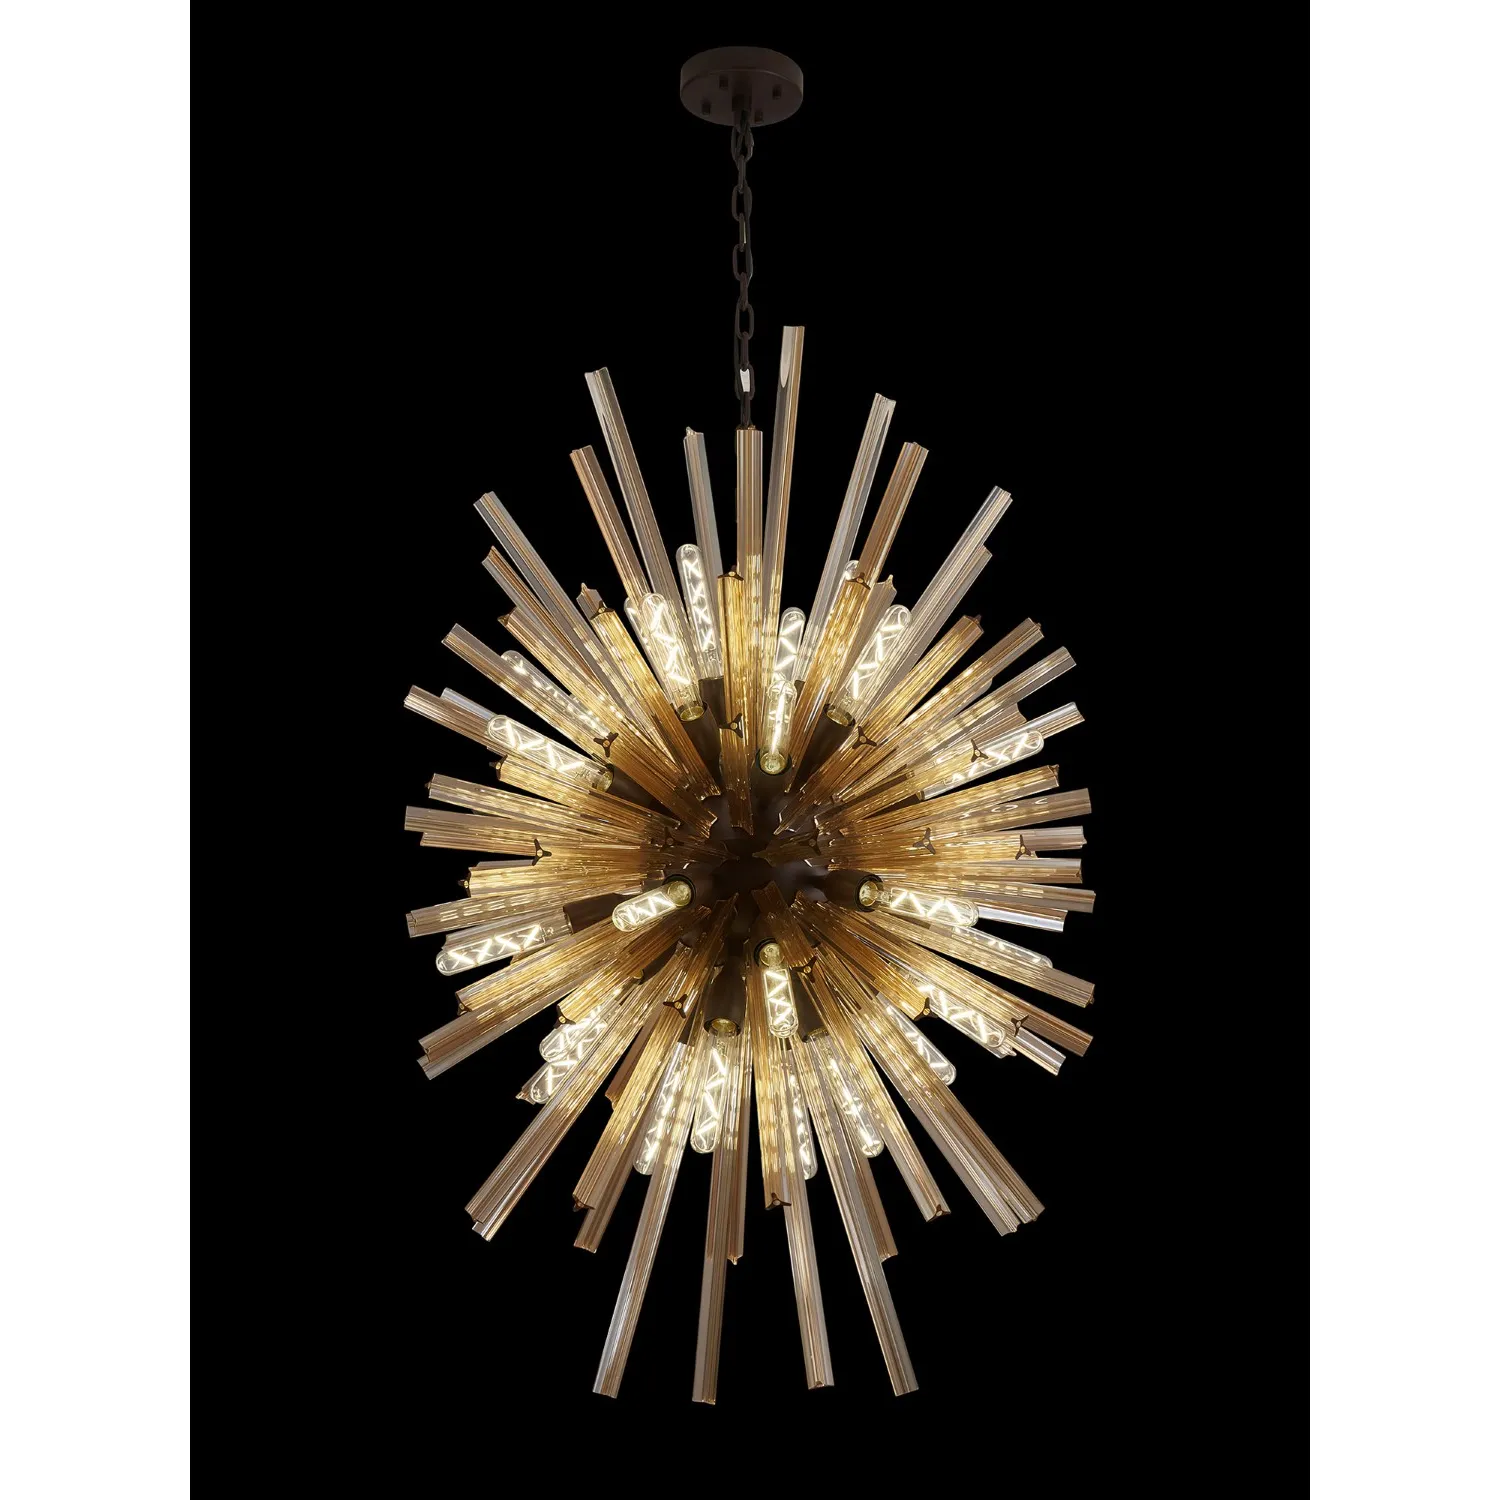 Dalston 32 Light E27, Vertical Oval Pendant Brown Oxide Champagne Glass, Item Weight: 22kg